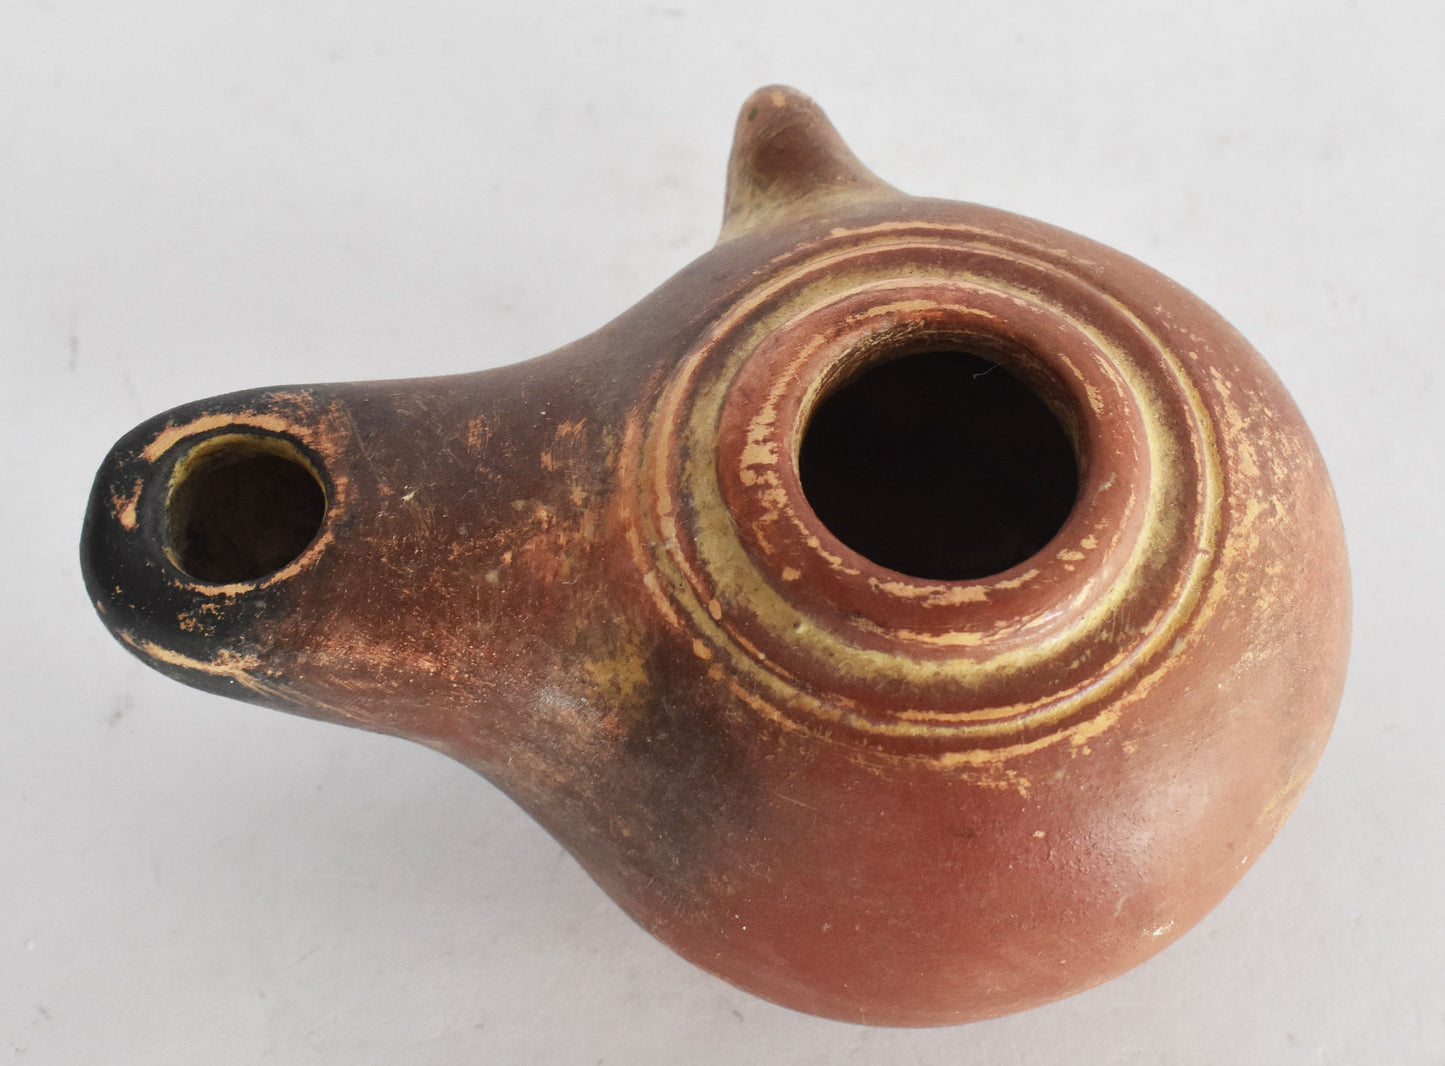 Oil Lamp - Athens - 600 BC - Elongated Nozzle,Incised Band around the Center, a Pinched 'Ear' - Museum Reproduction - Ceramic Artifact